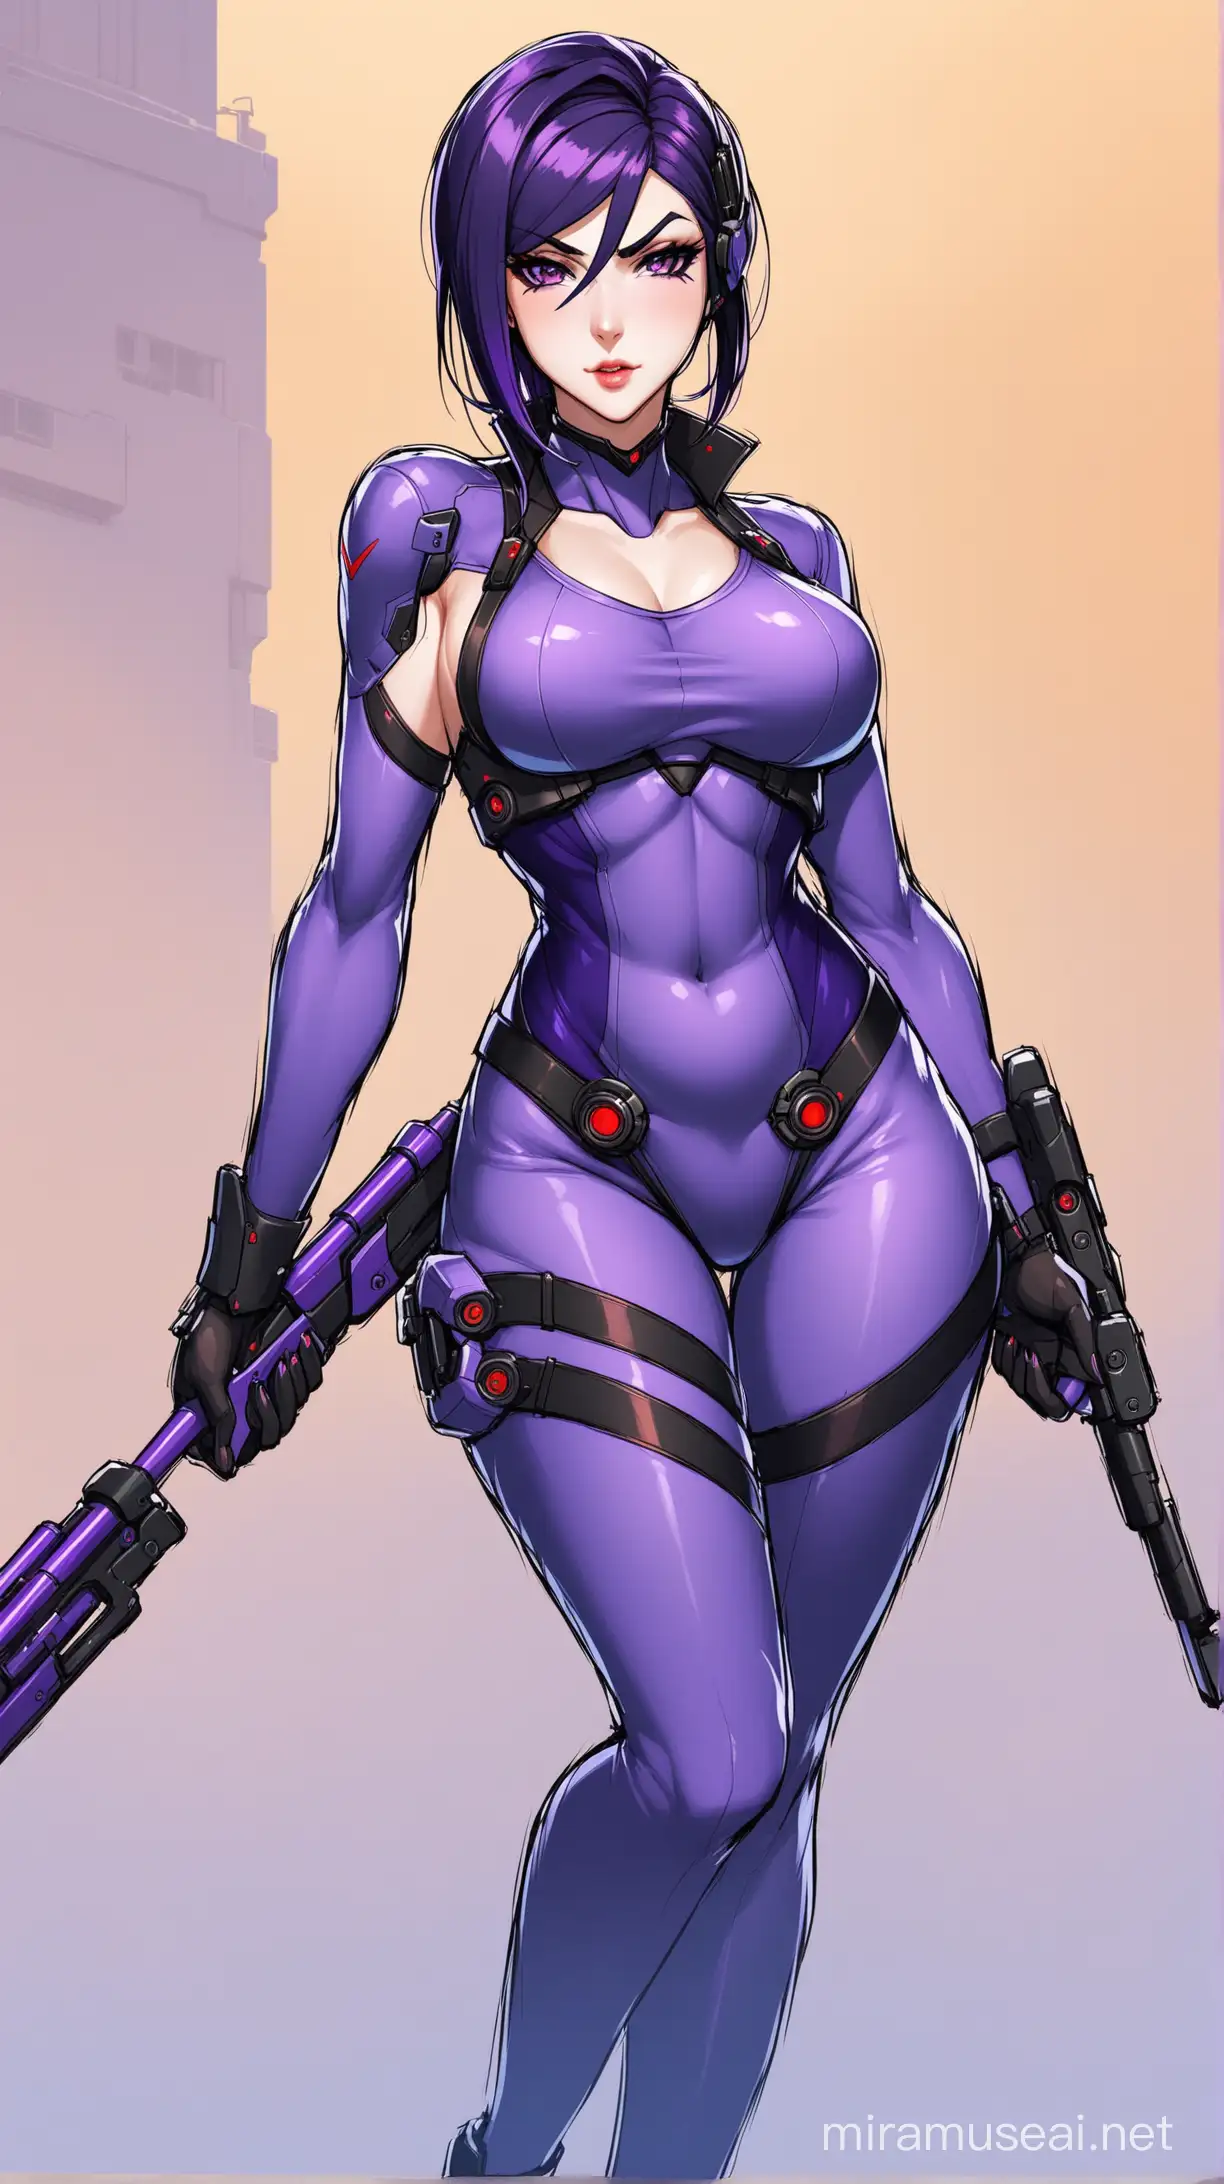 Sultry Widowmaker from Overwatch in Seductive Pose